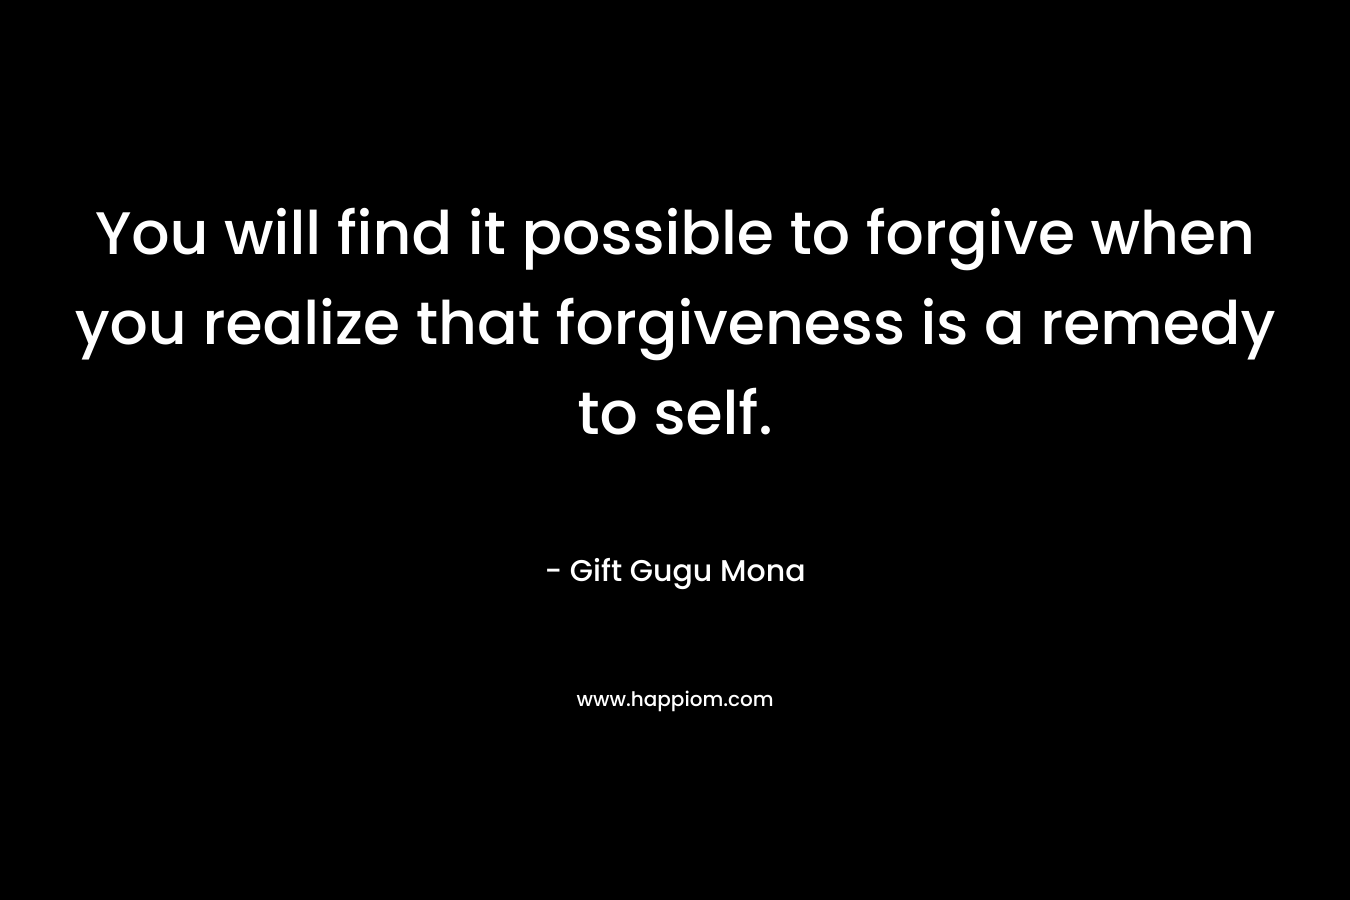 You will find it possible to forgive when you realize that forgiveness is a remedy to self.